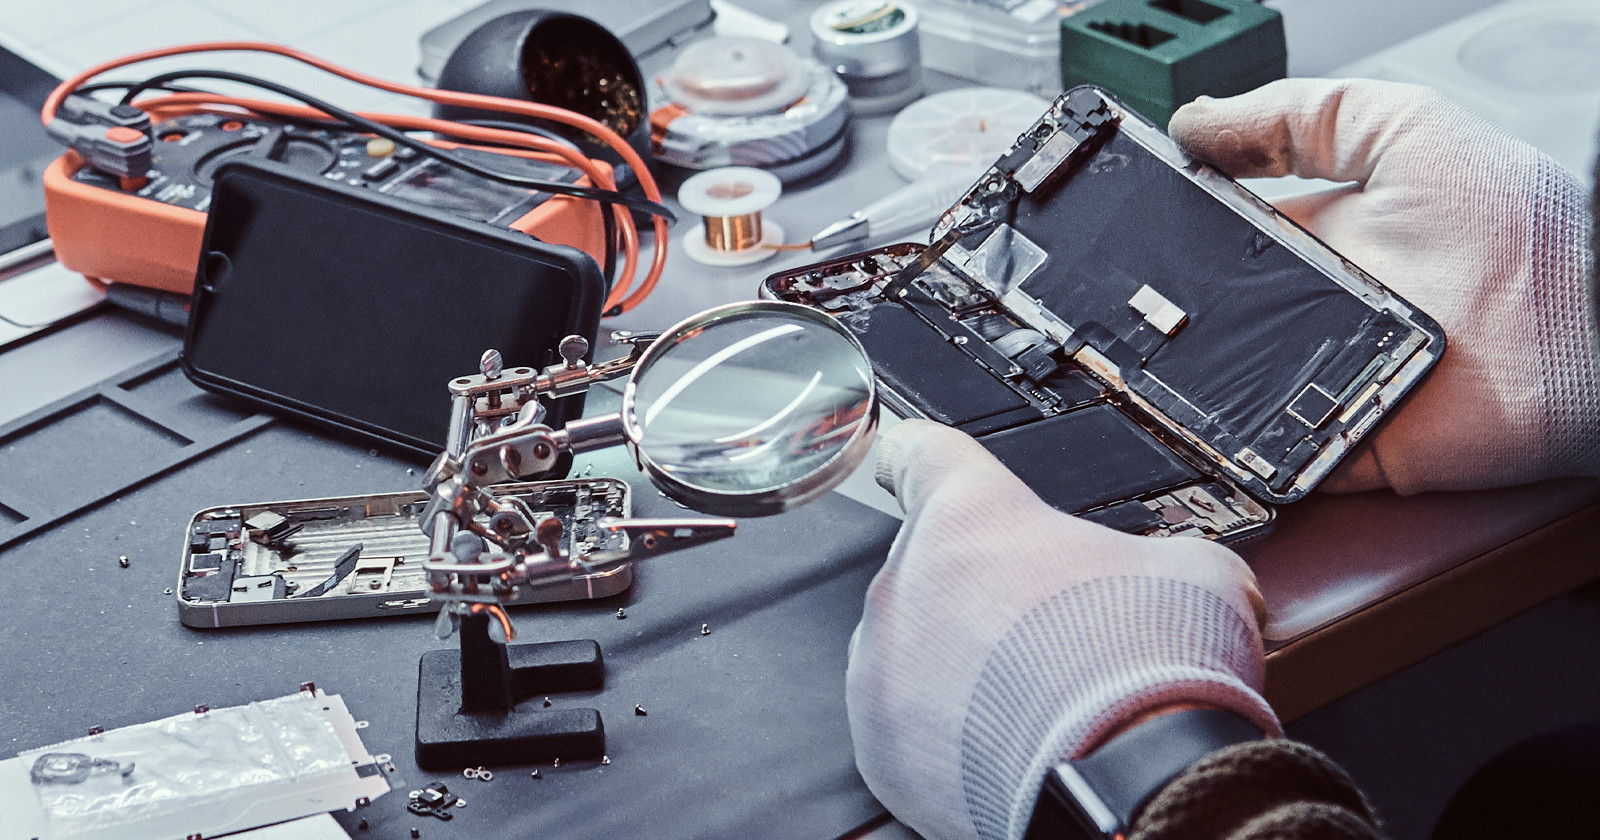 New York State Passes Landmark Electronics Right to Repair Law